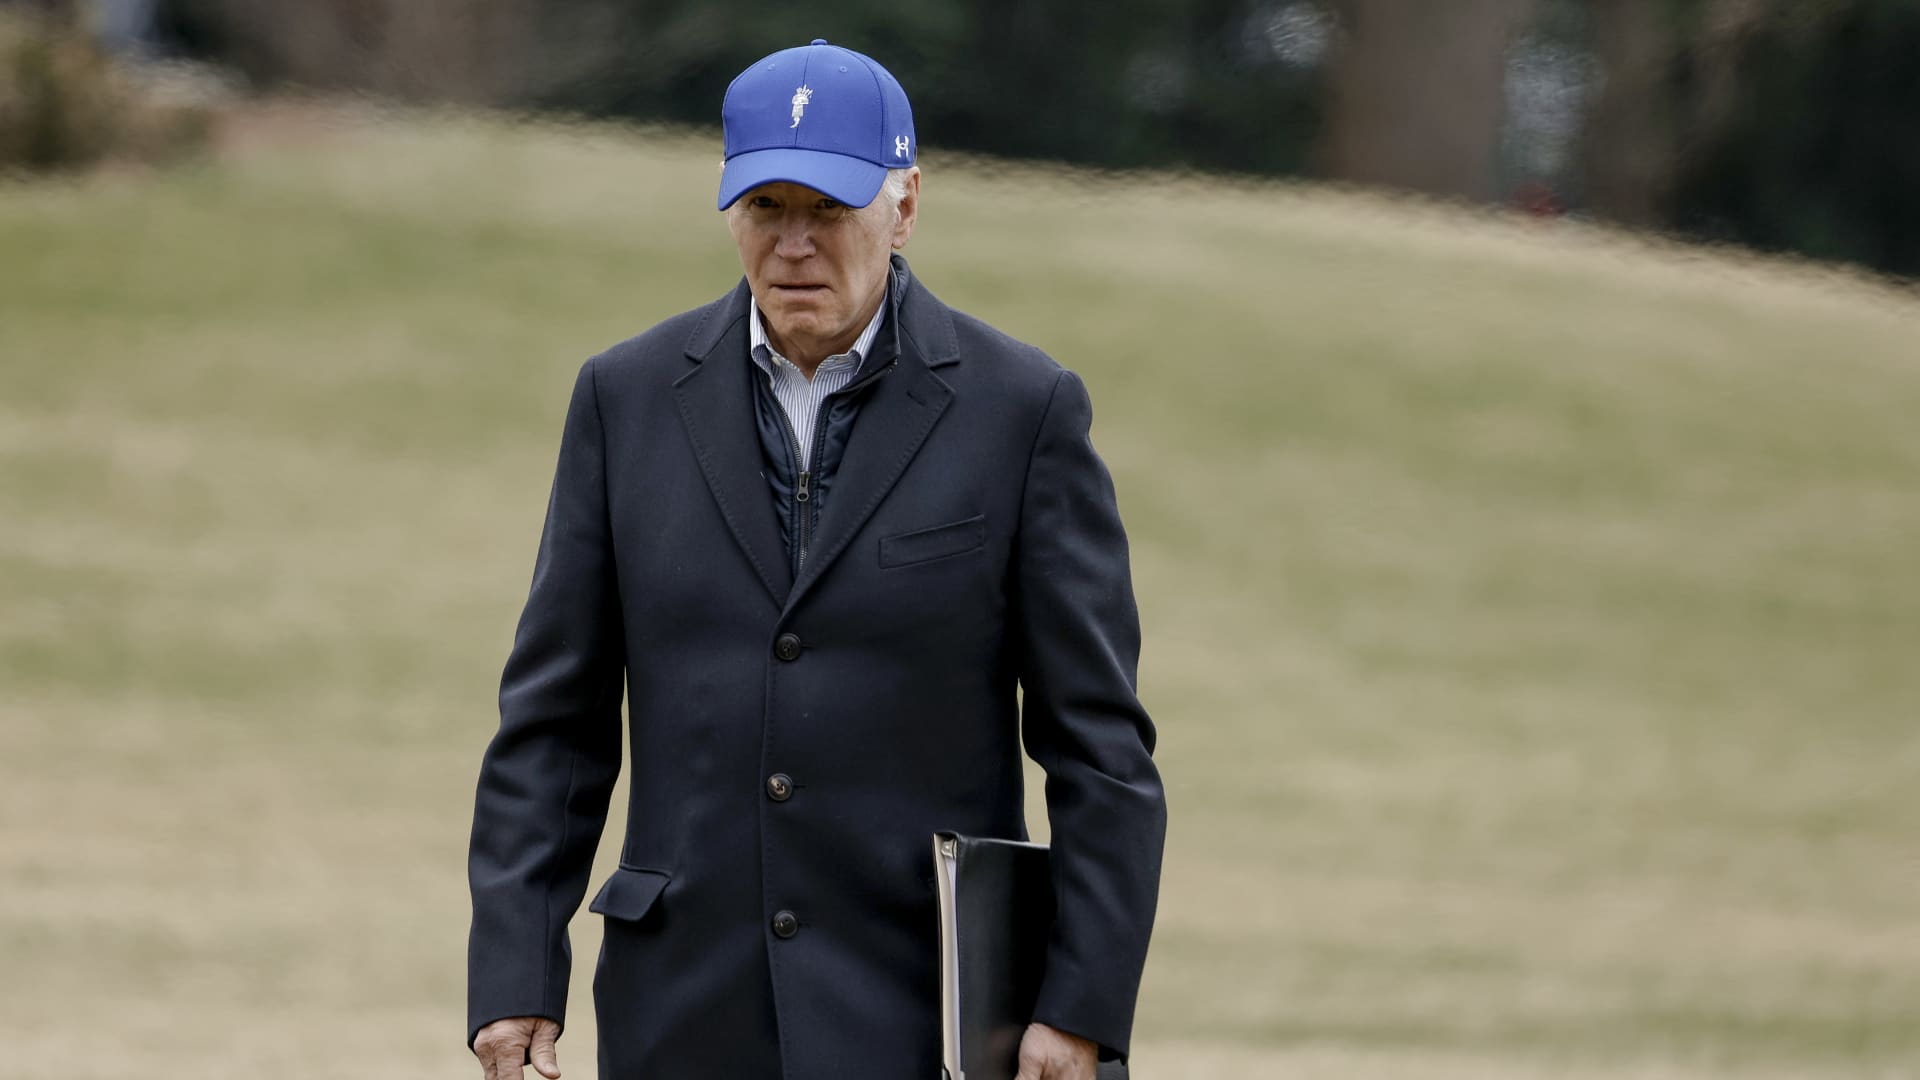 U.S. President Joe Biden walks on the South Lawn after returning to the White House on Marine One on February 06, 2023 in Washington, DC.